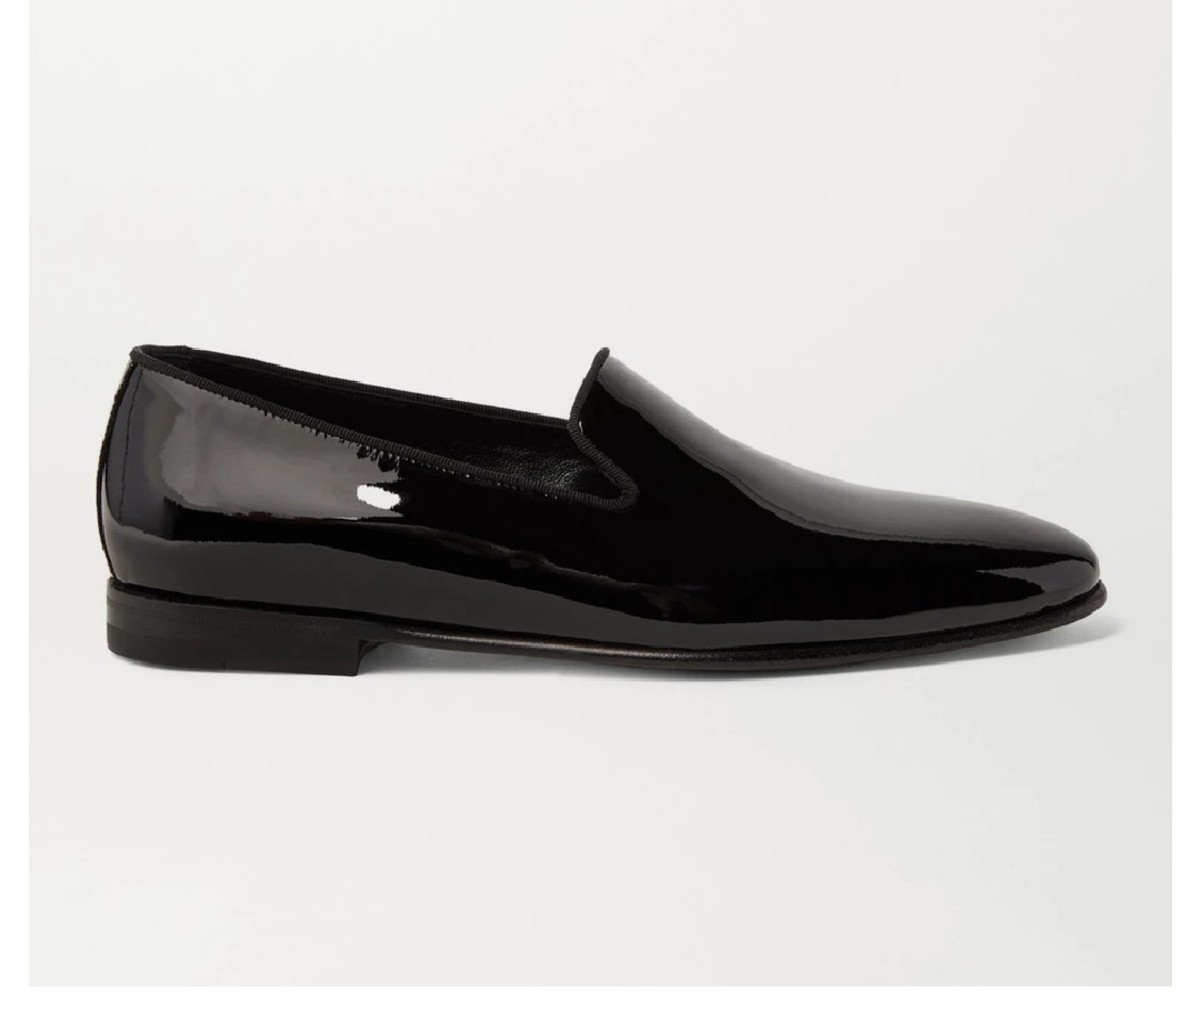 Top 6 Best Leather Shoes For Men (2022) Manolo Blahnik Mario Grosgrain-Trimmed Patent-Leather Loafers